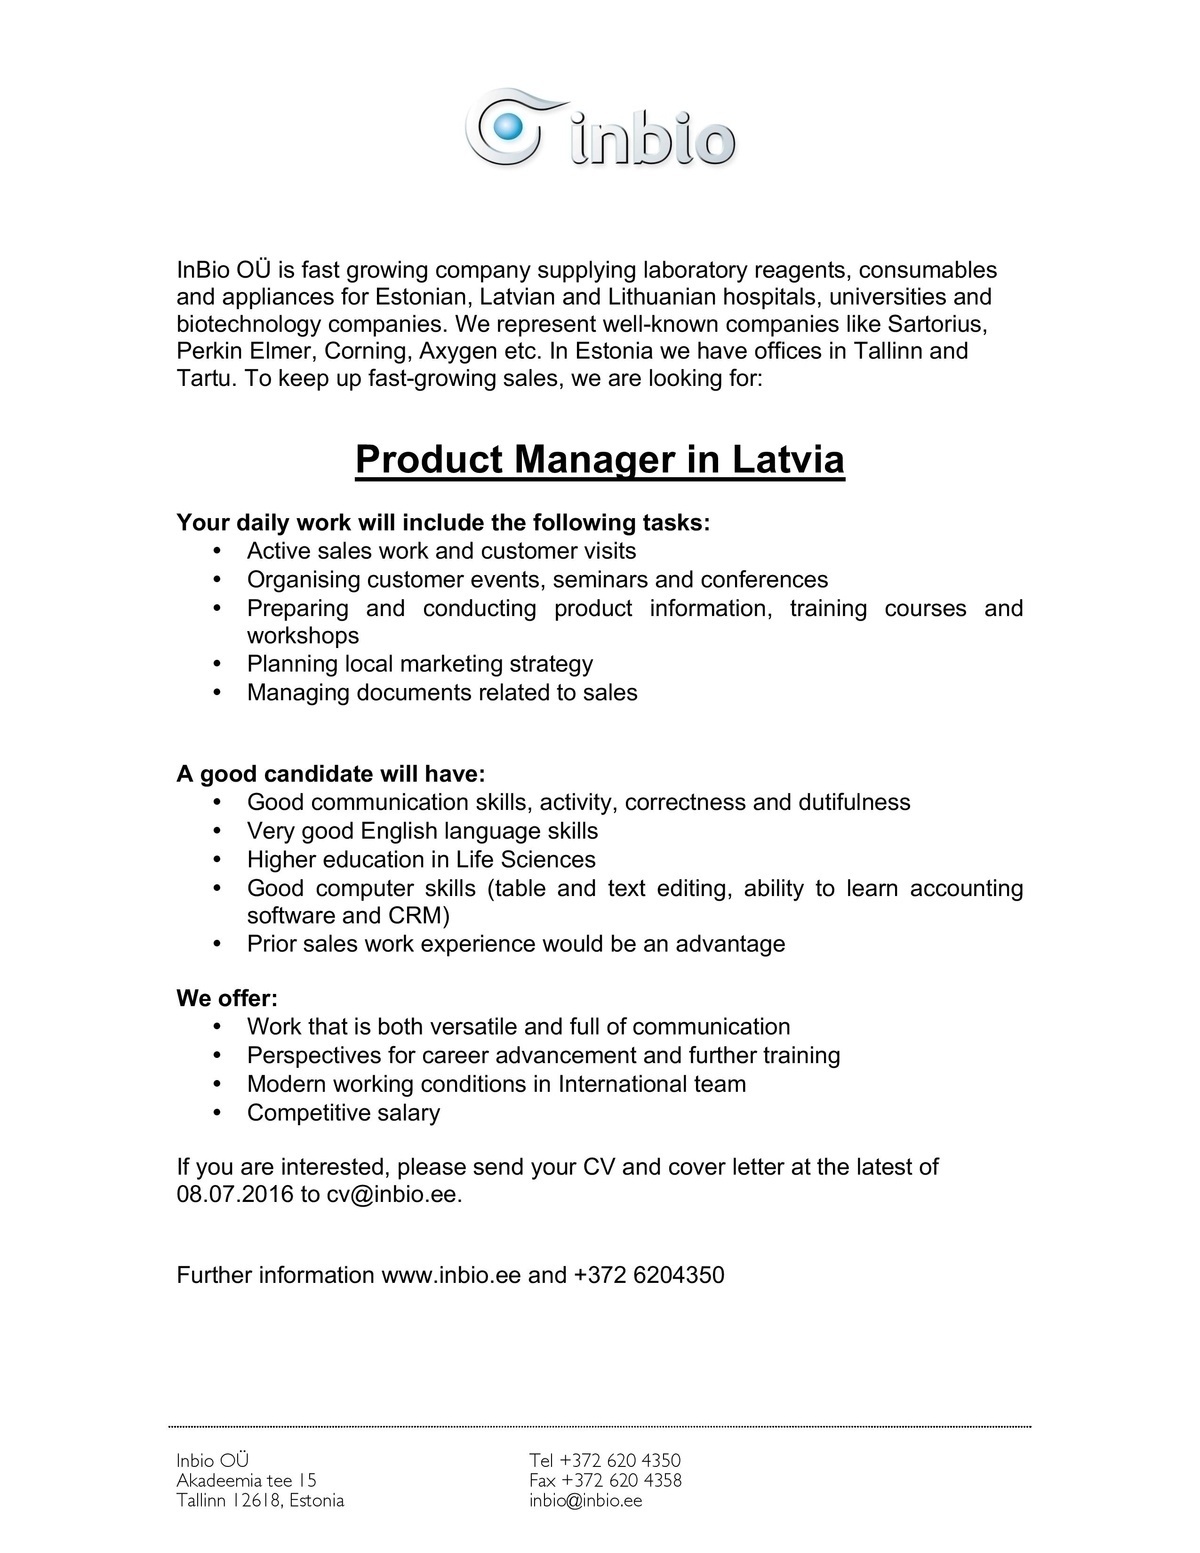 Inbio OÜ Product Manager in Latvia